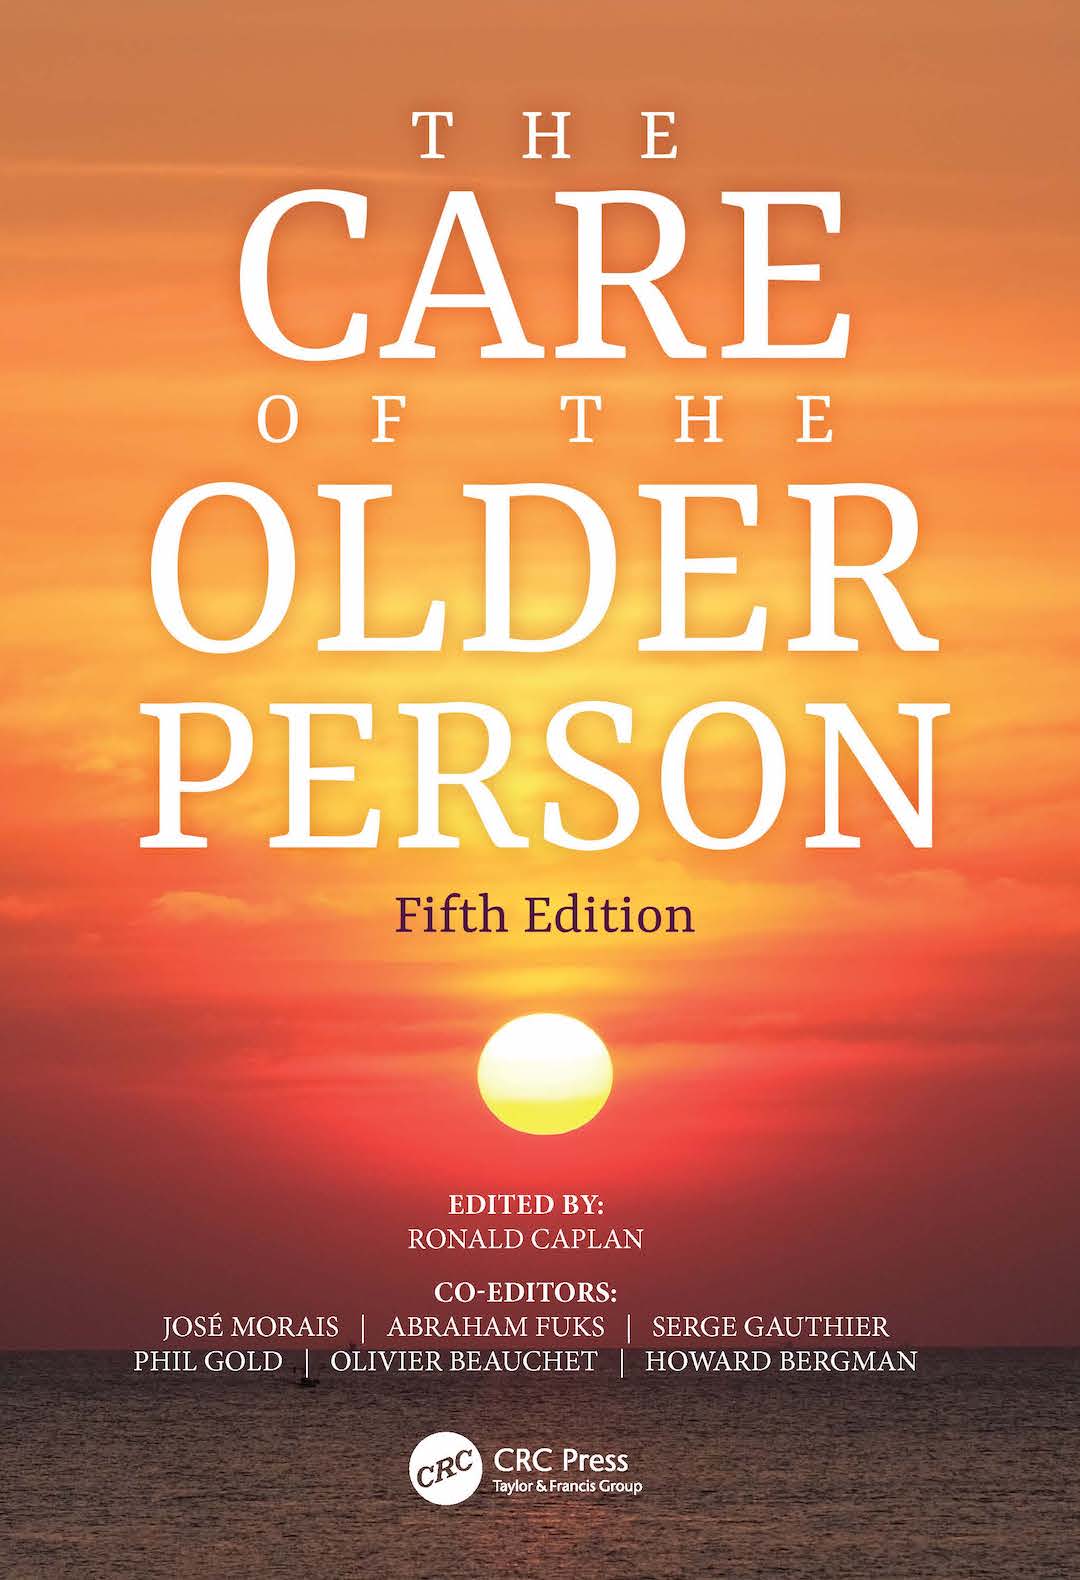 Care of the Older Person Fifth Edition